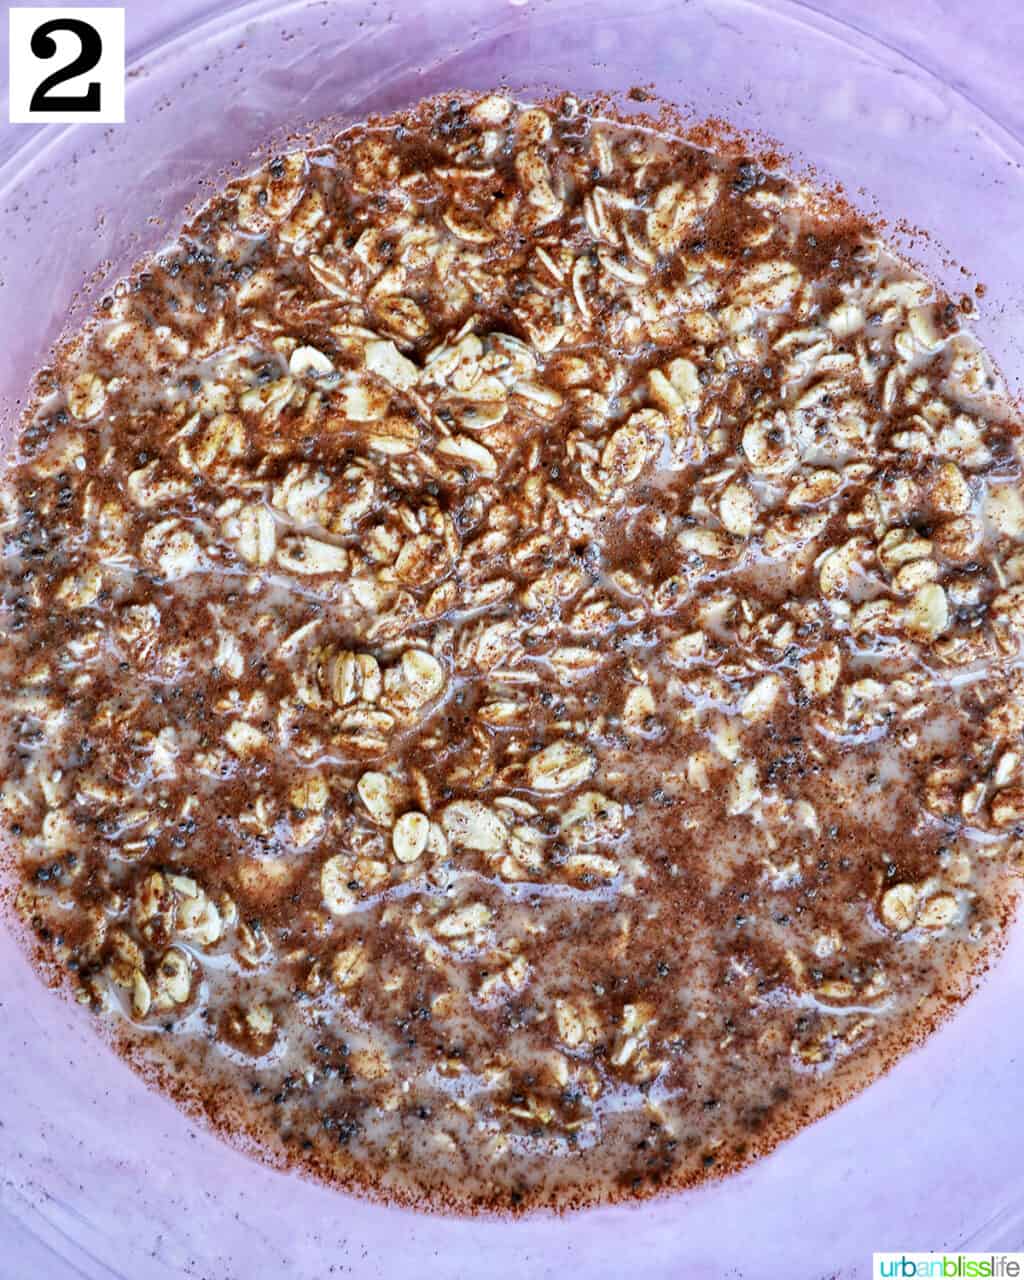 mixed ingredients to make cinnamon roll overnight oats in a large glass bowl.